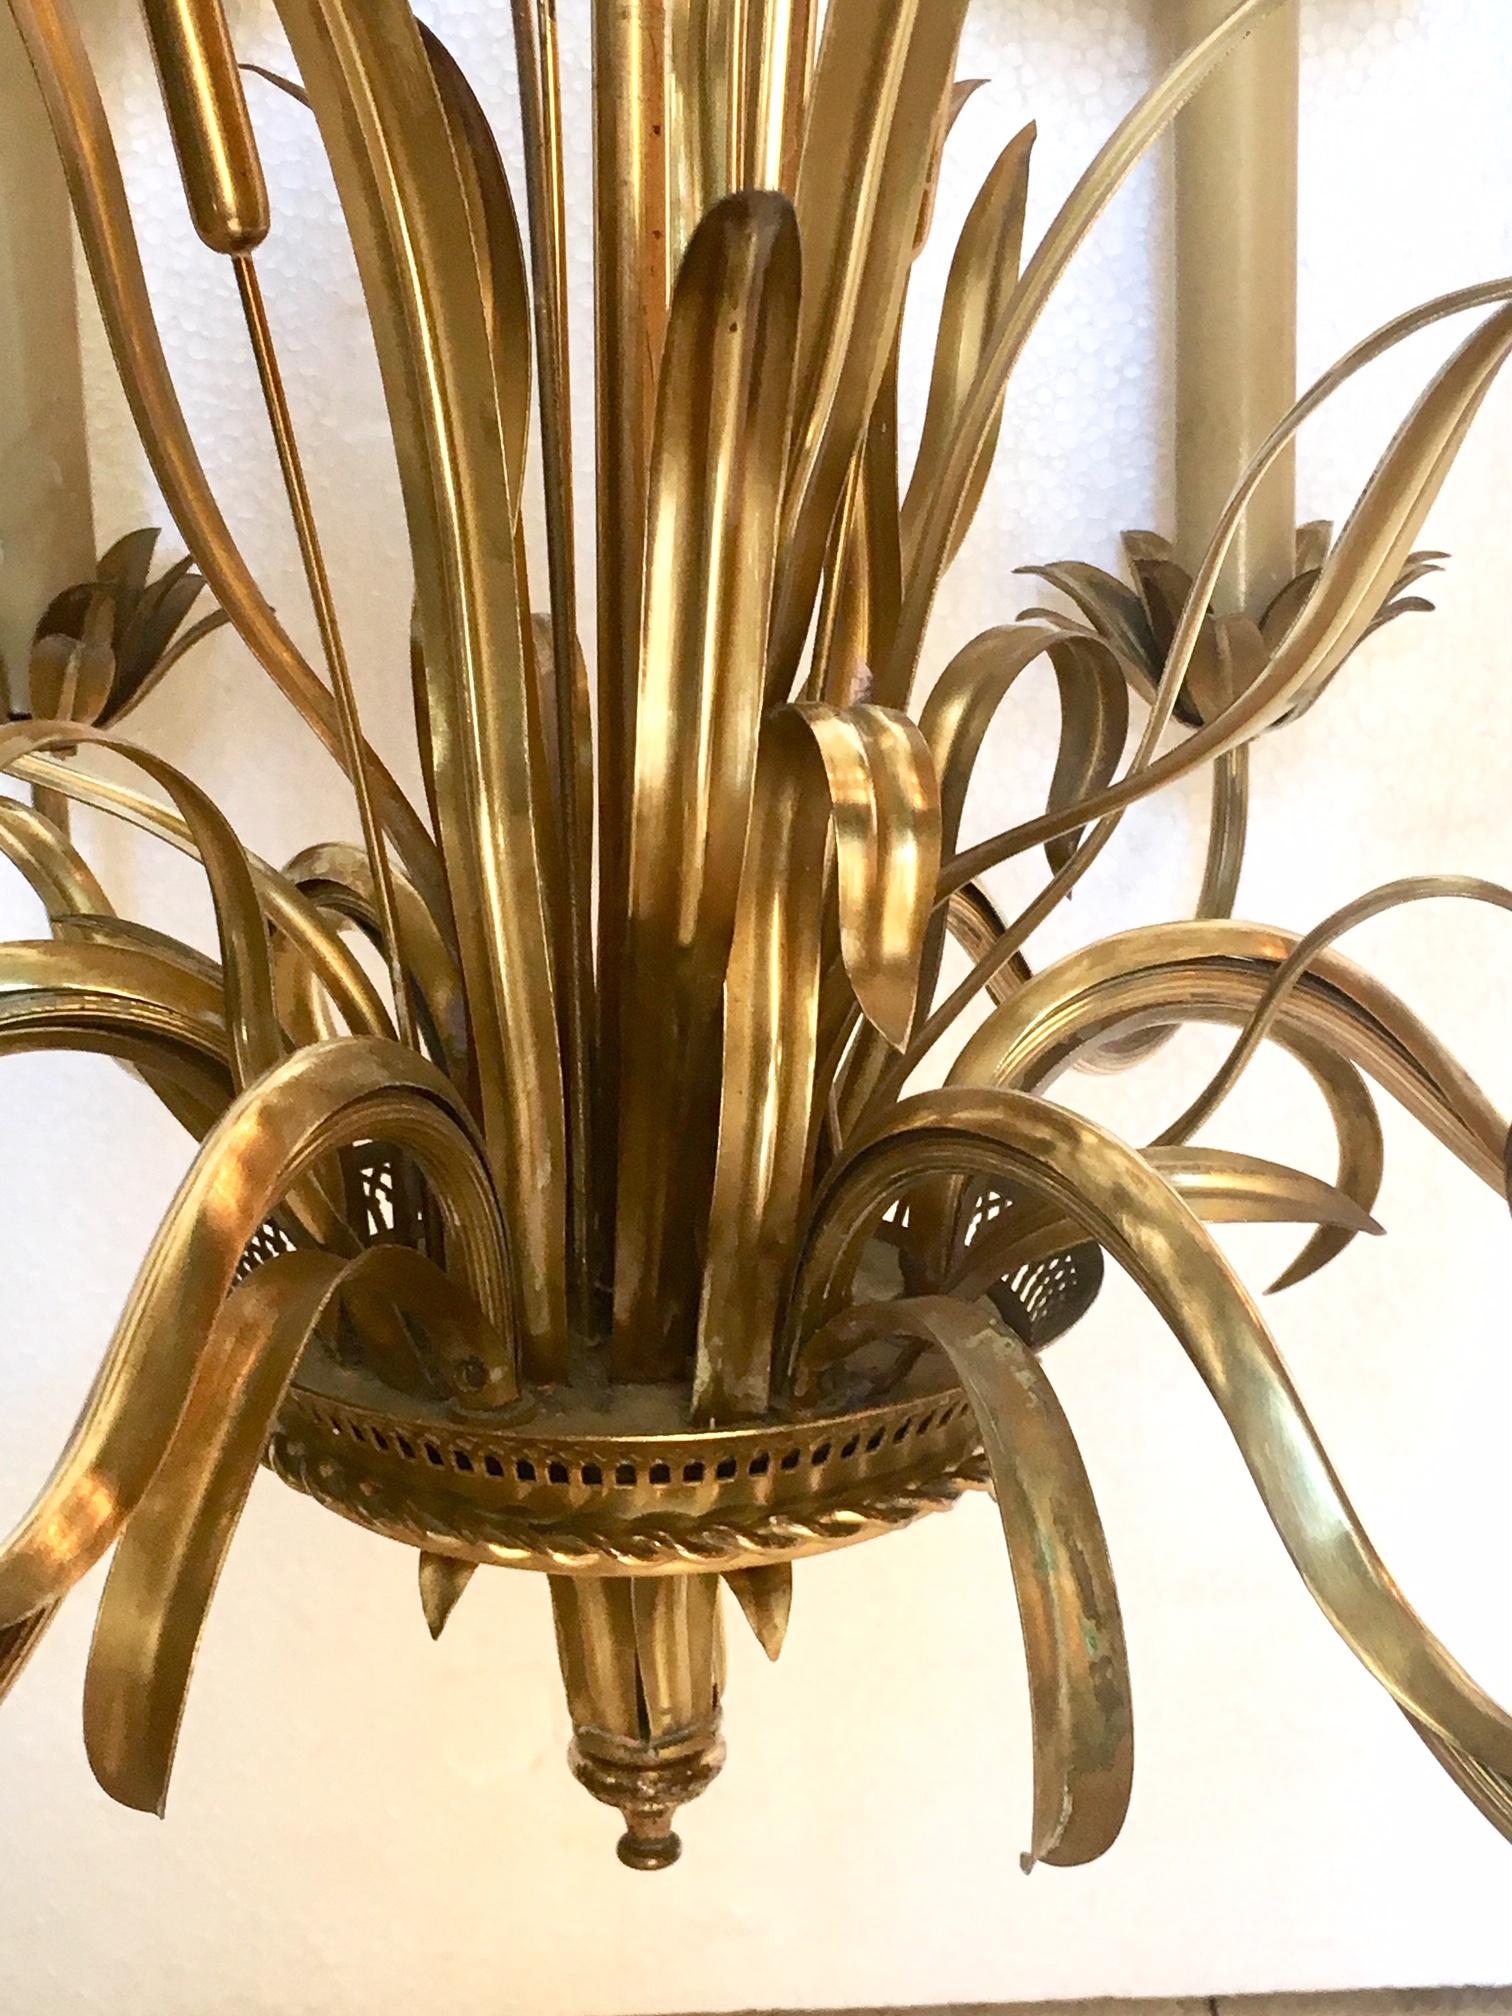 Chandelier lamp attributed to Maison Baguès, in bronze and golden brass, consists of six arms which each end in the form of a flower, the central part of the lamp is decorated with branches and rushes, and plant motifs.
The small lampshades are in